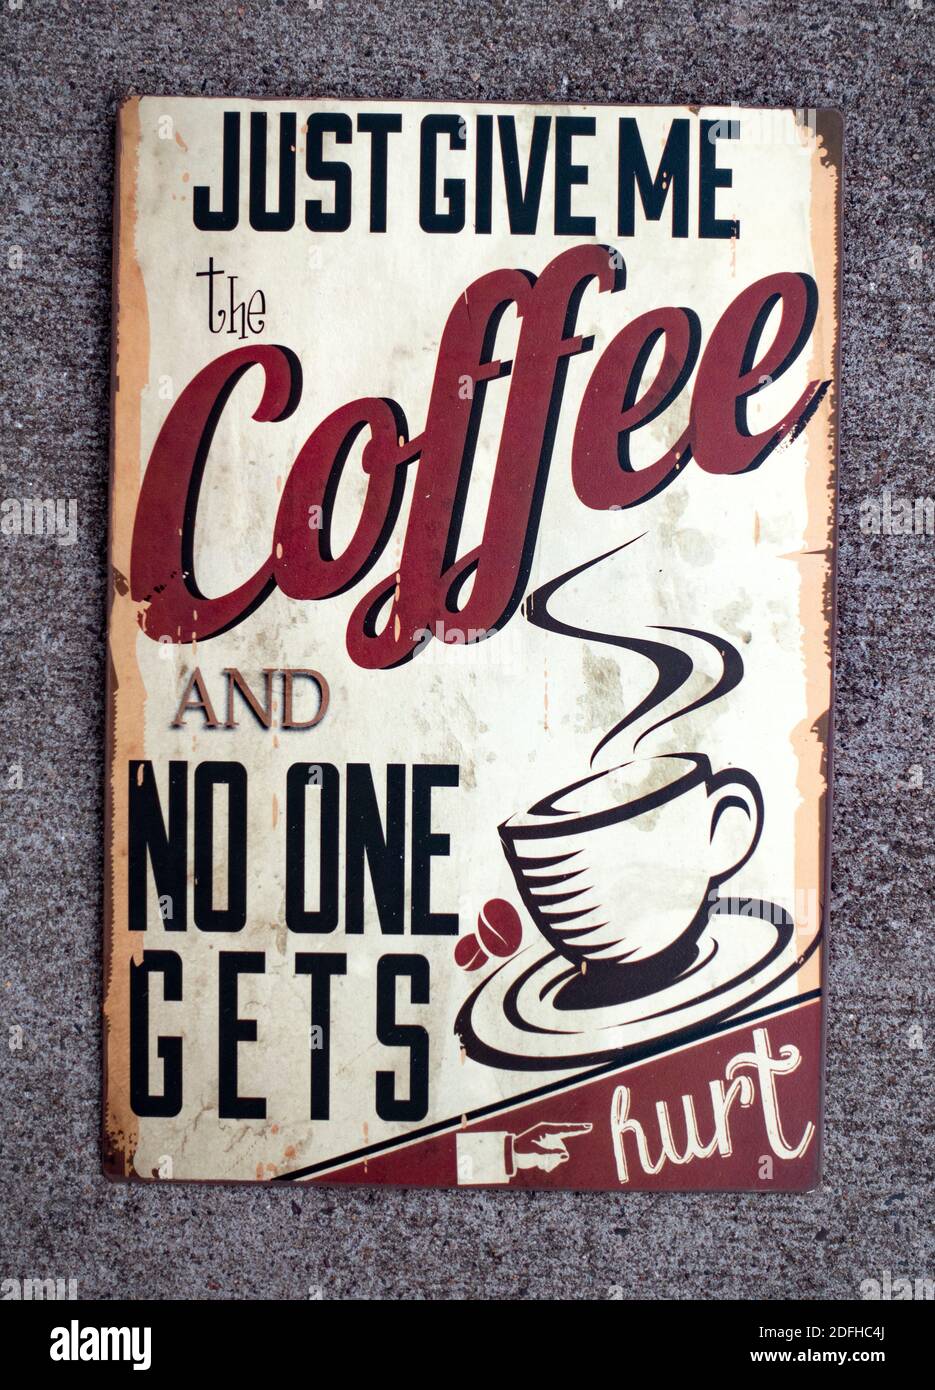 Fun metal plaque to hang and a reminder for coffee first stating, 'just give me the coffee and no one gets hurt'. St Paul Minnesota MN USA Stock Photo